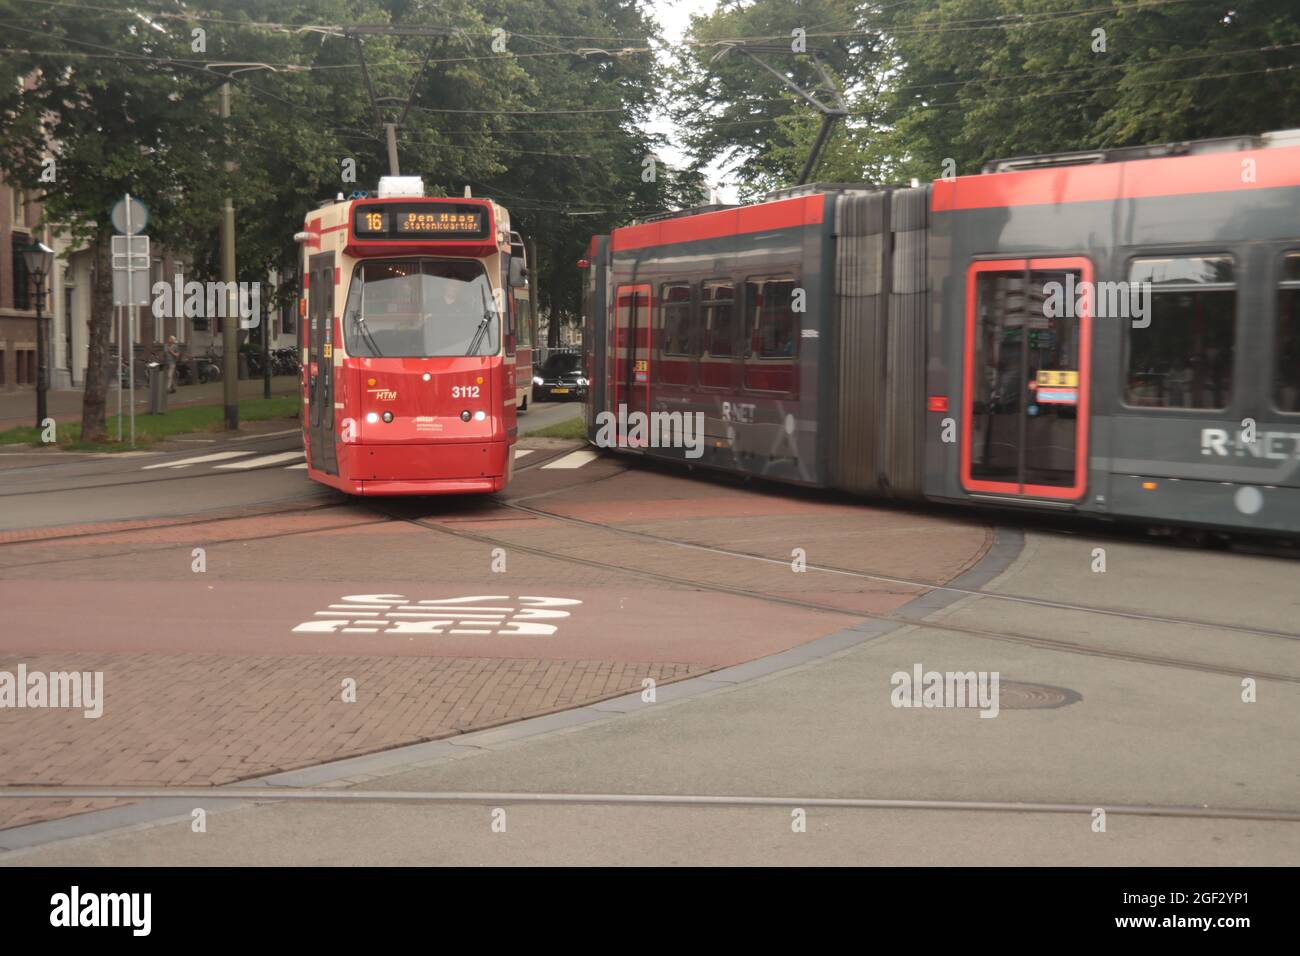 Avenio tram 5051 on line 15 and GLT tram 3112 on line 16 of HTM at the city  center of The Hague the Netherlands Stock Photo - Alamy